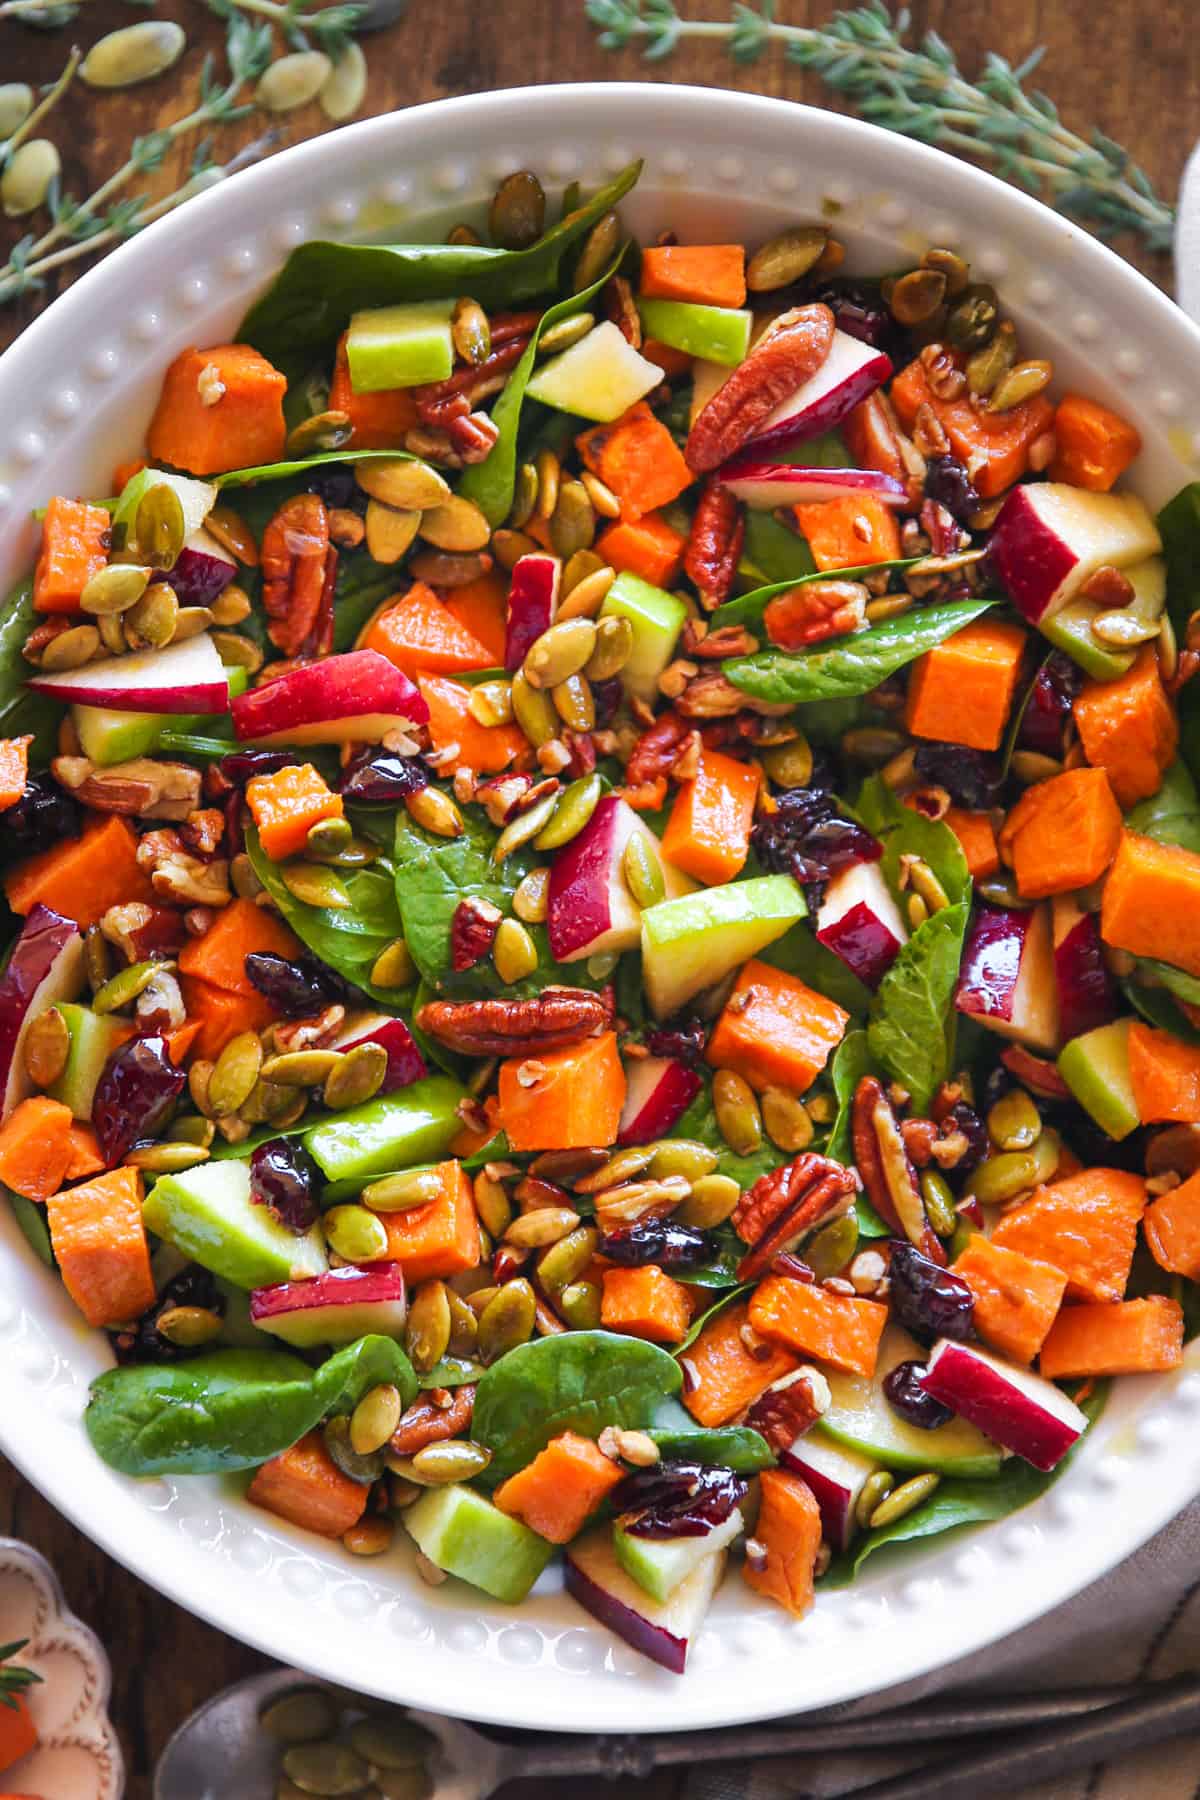 Roasted Sweet Potato Salad features spinach, apples, dried cranberries, pecans, pumpkin seeds in a white bowl.